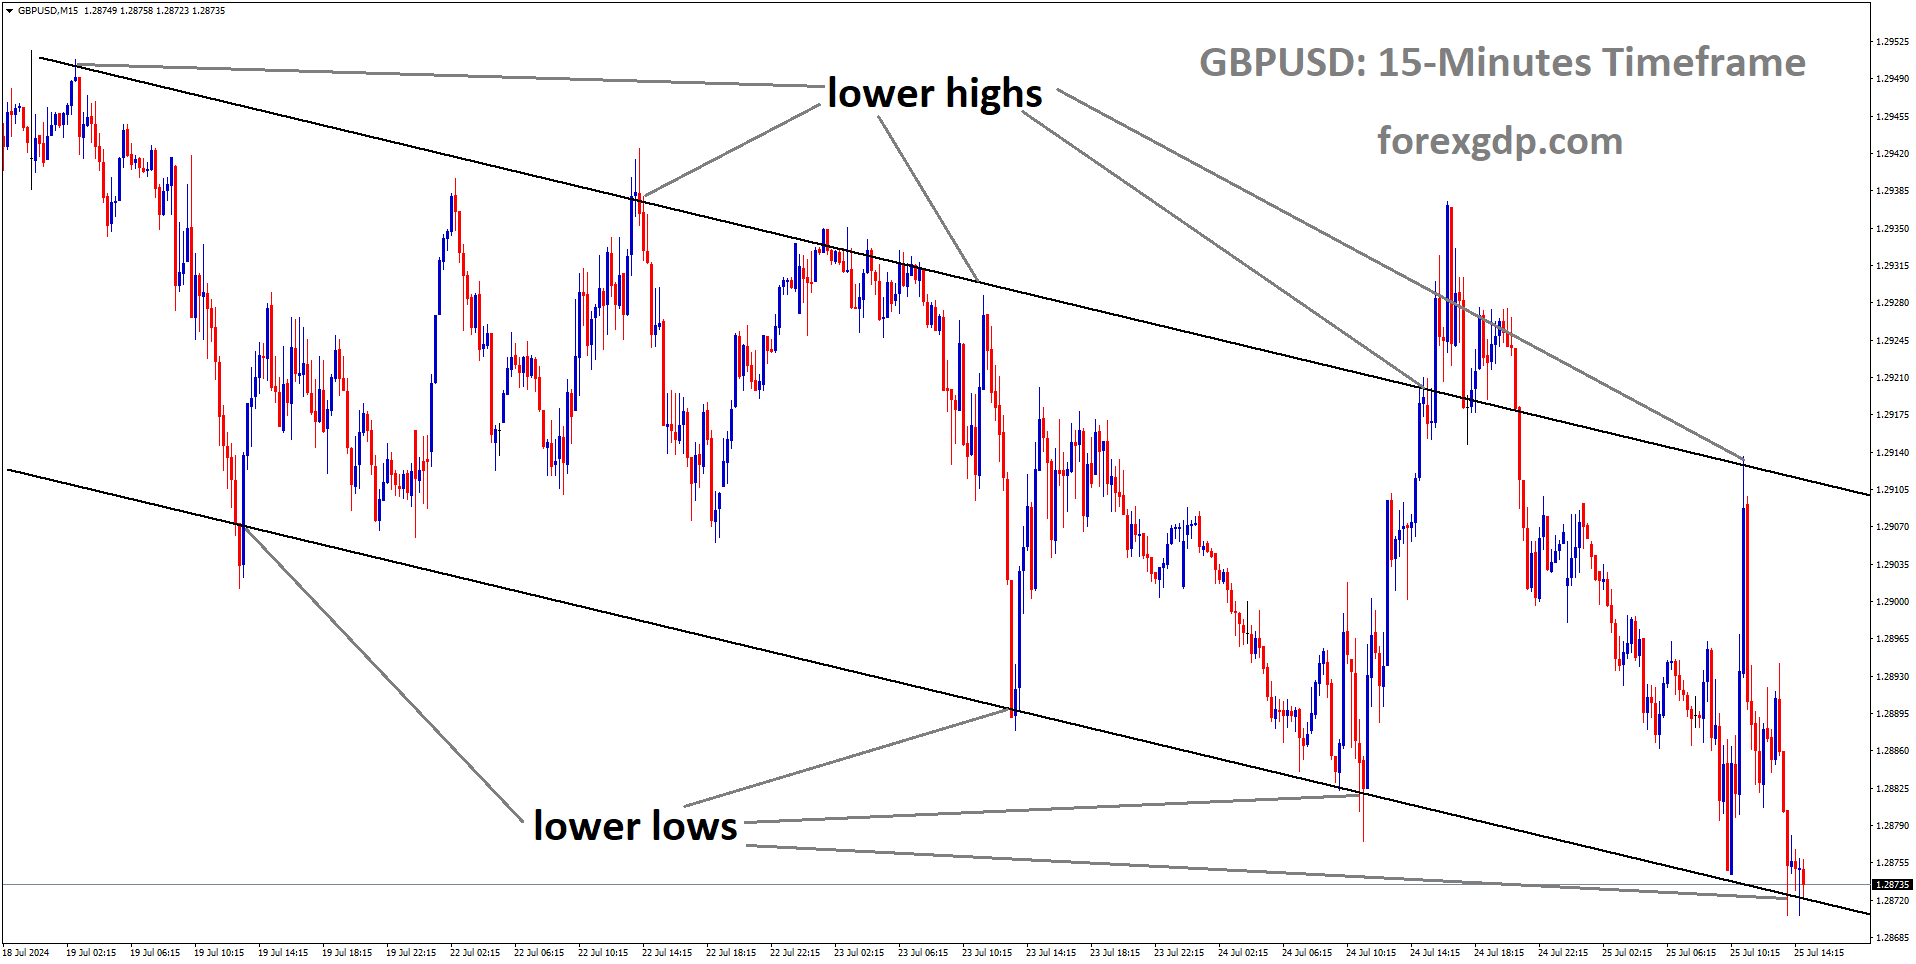 GBPUSD is moving in Descending channel and market has reached lower low area of the channel